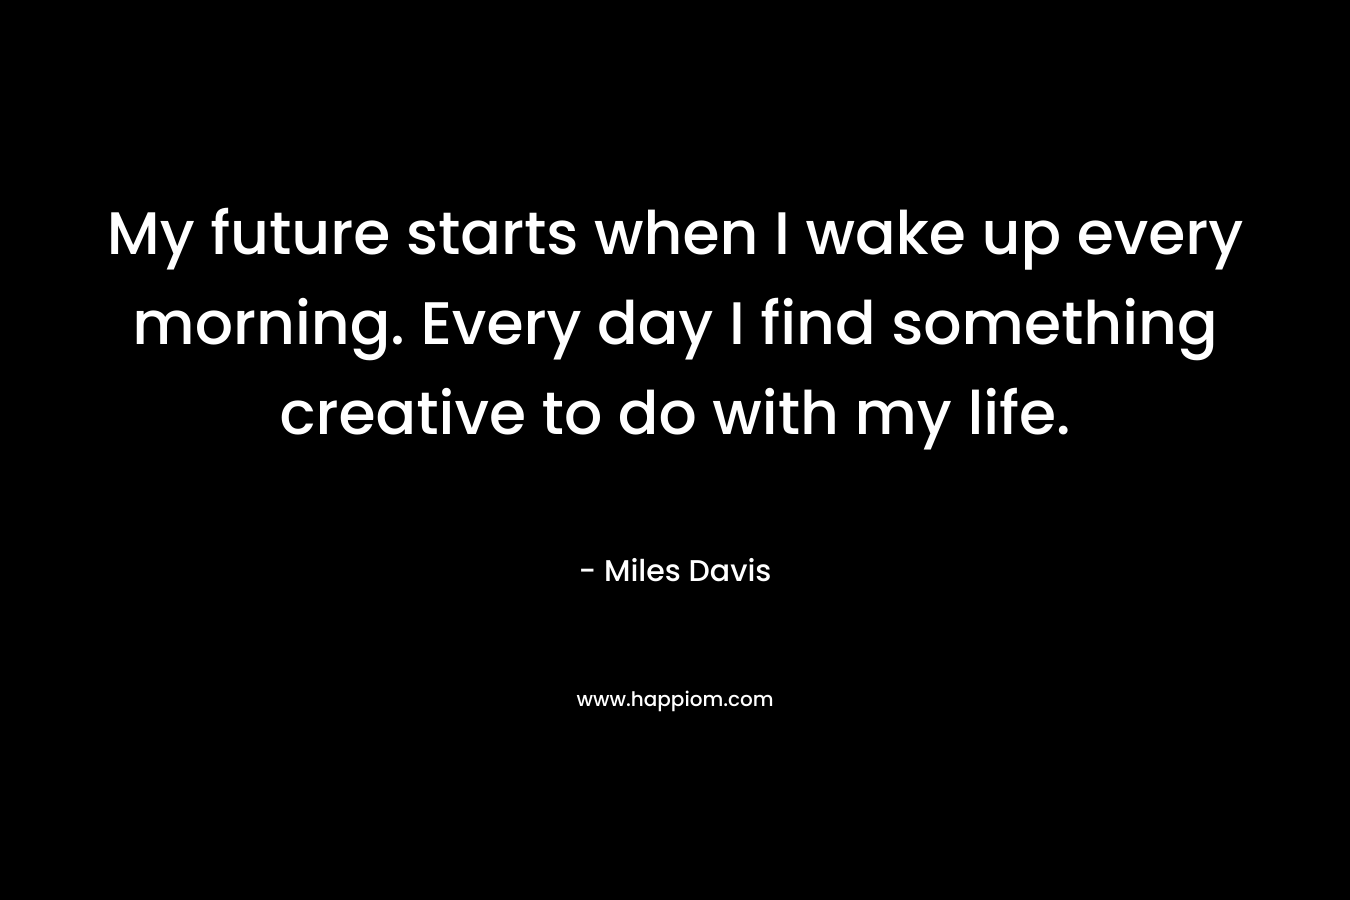 My future starts when I wake up every morning. Every day I find something creative to do with my life.